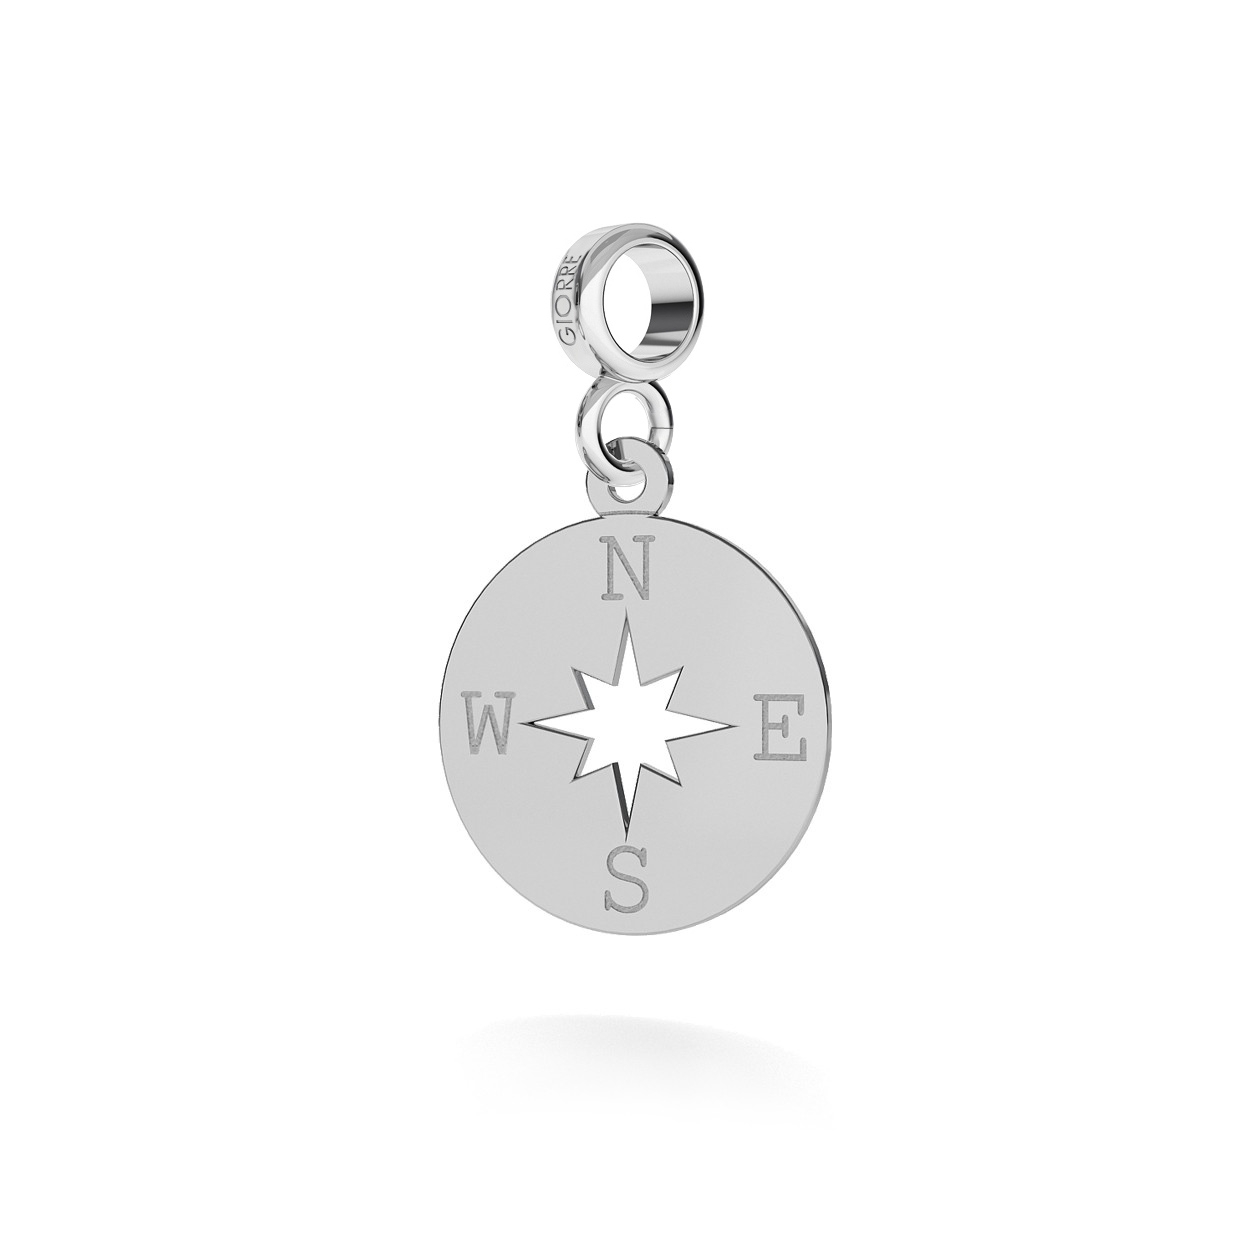 CHARM 63, WIND ROSE, SILVER 925, RHODIUM OR GOLD PLATED